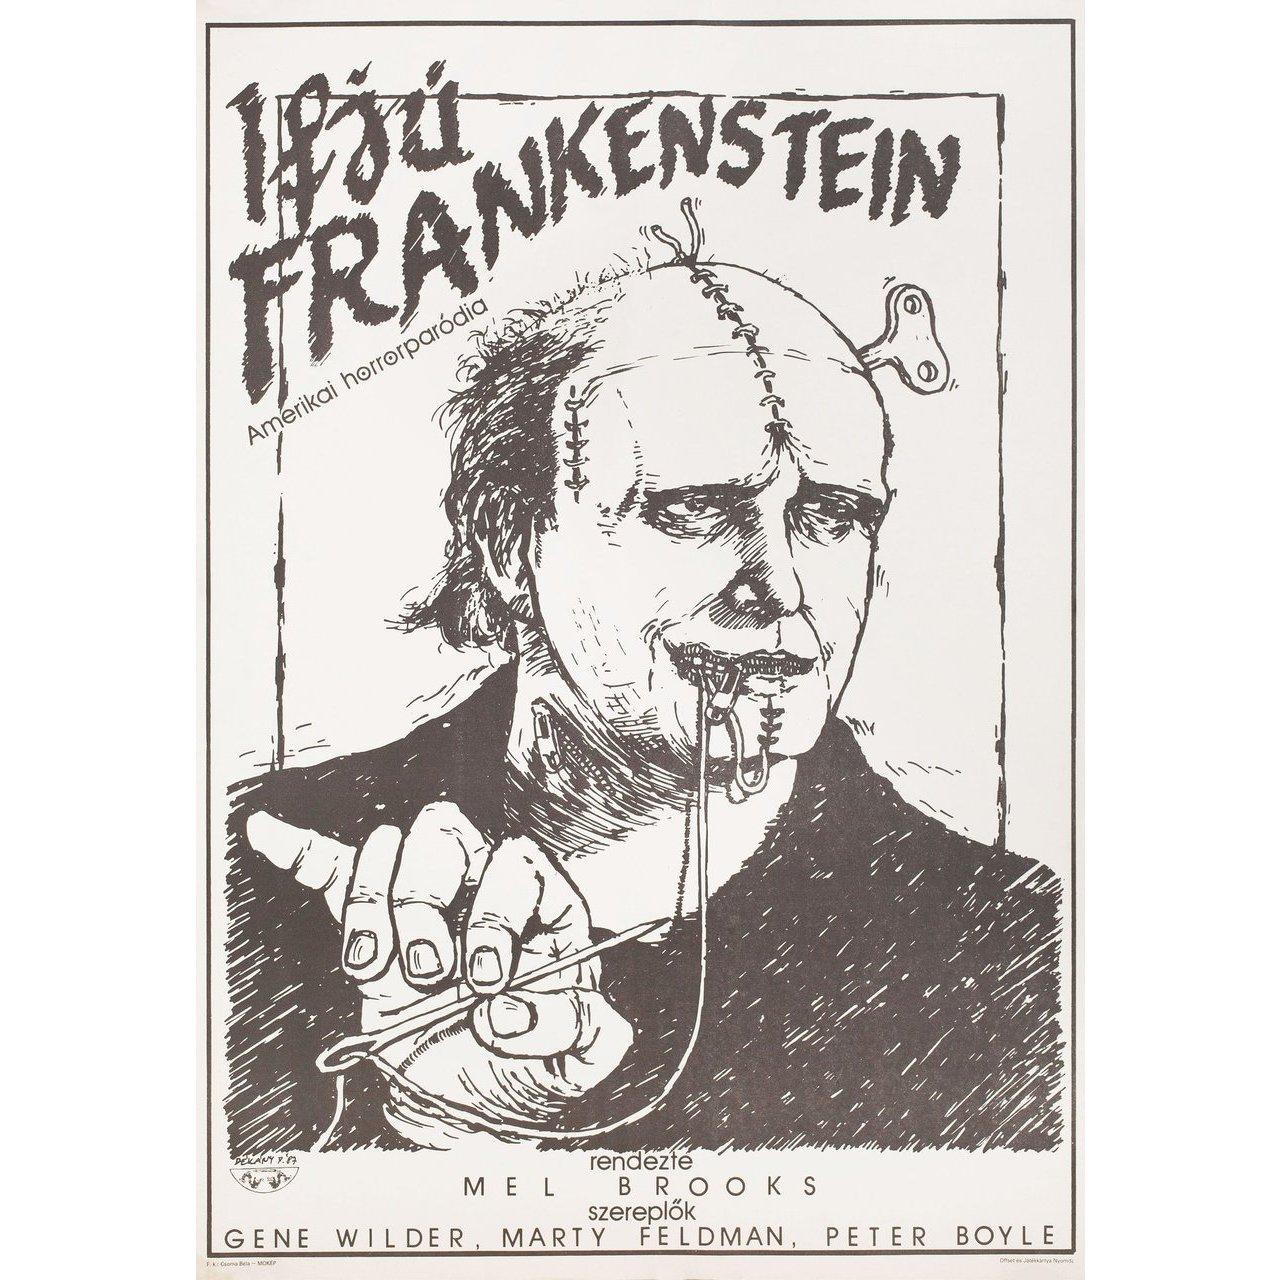 Original 1988 Hungarian A1 poster by Peter Dekany for the 1974 film “Young Frankenstein” directed by Mel Brooks with Gene Wilder / Peter Boyle / Marty Feldman / Madeline Kahn. Very good-fine condition, rolled. Please note: the size is stated in